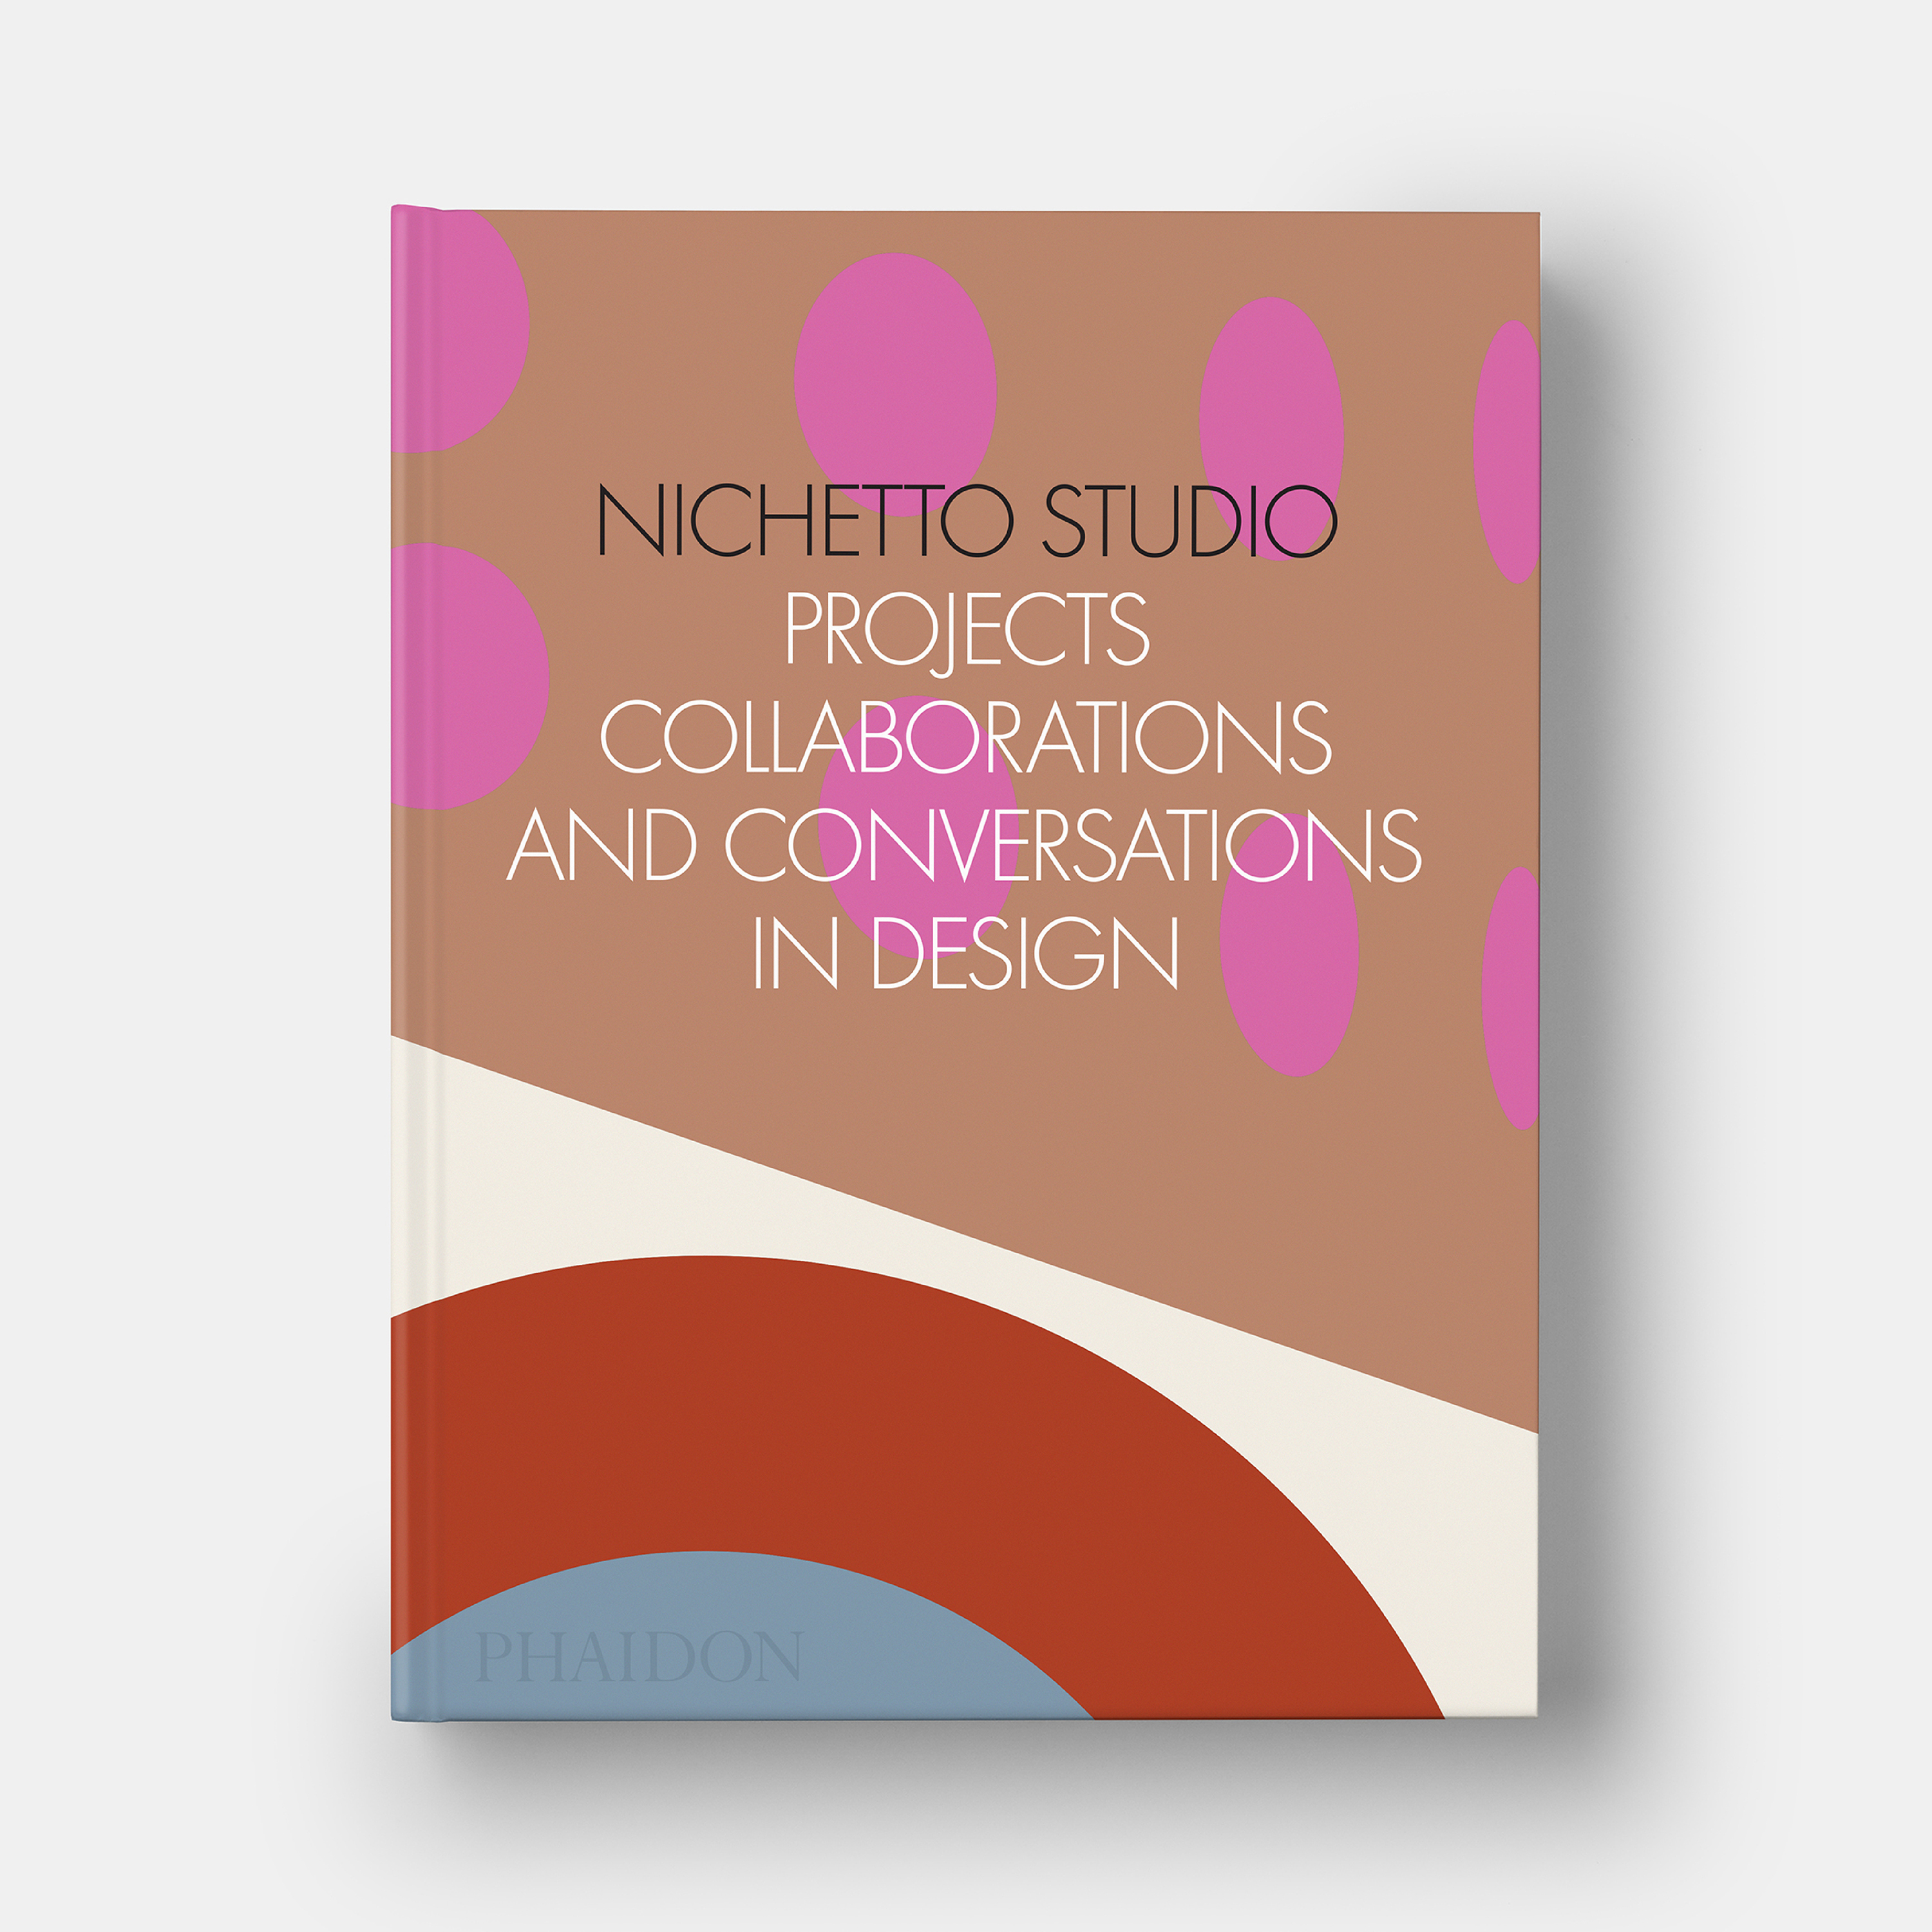 All you need to know about Nichetto Studio